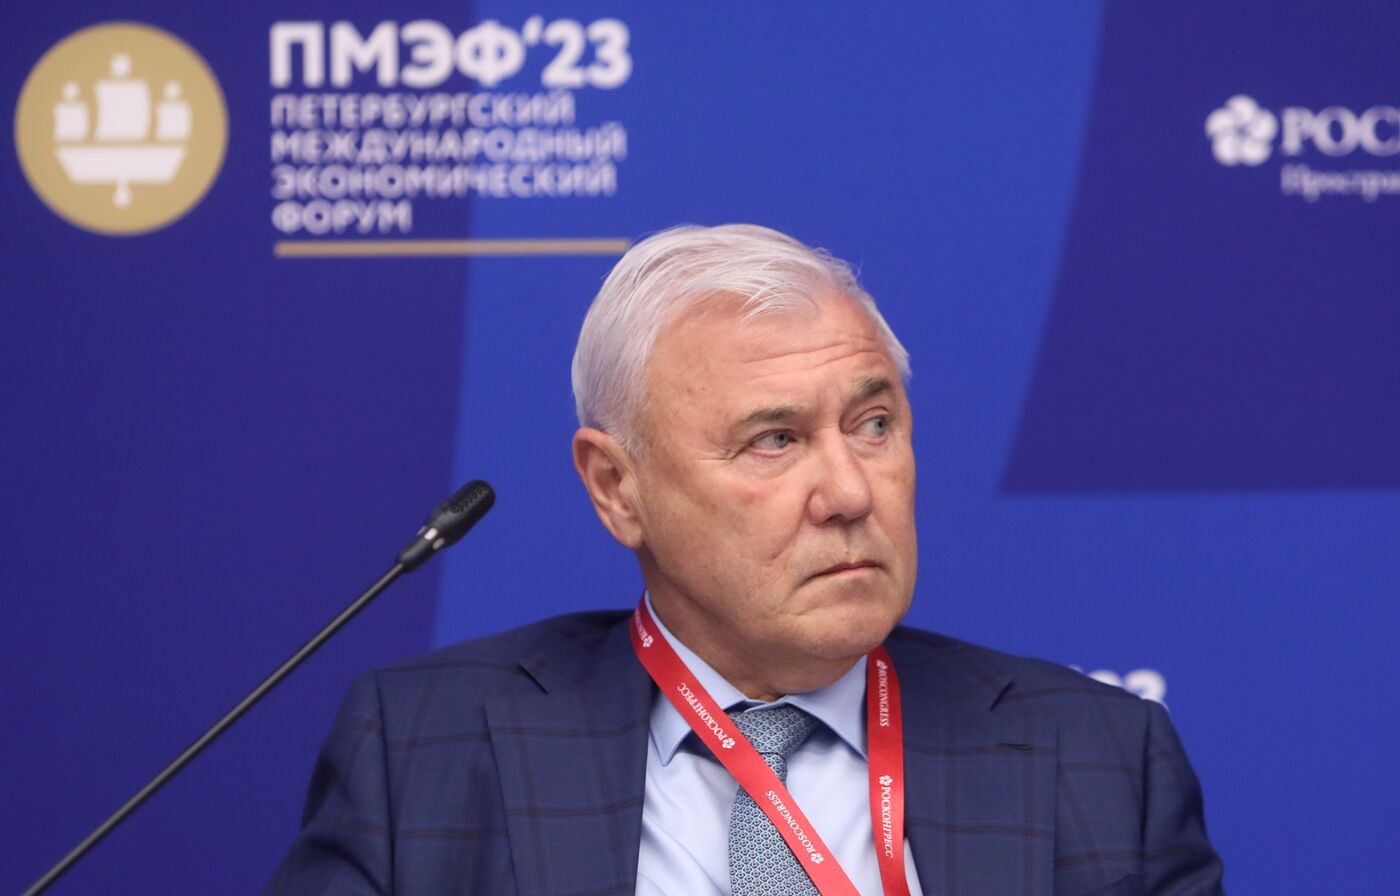 SPIEF-2023. Mining as a "White Swan" of the Russian Economy: What Should be Done Now?